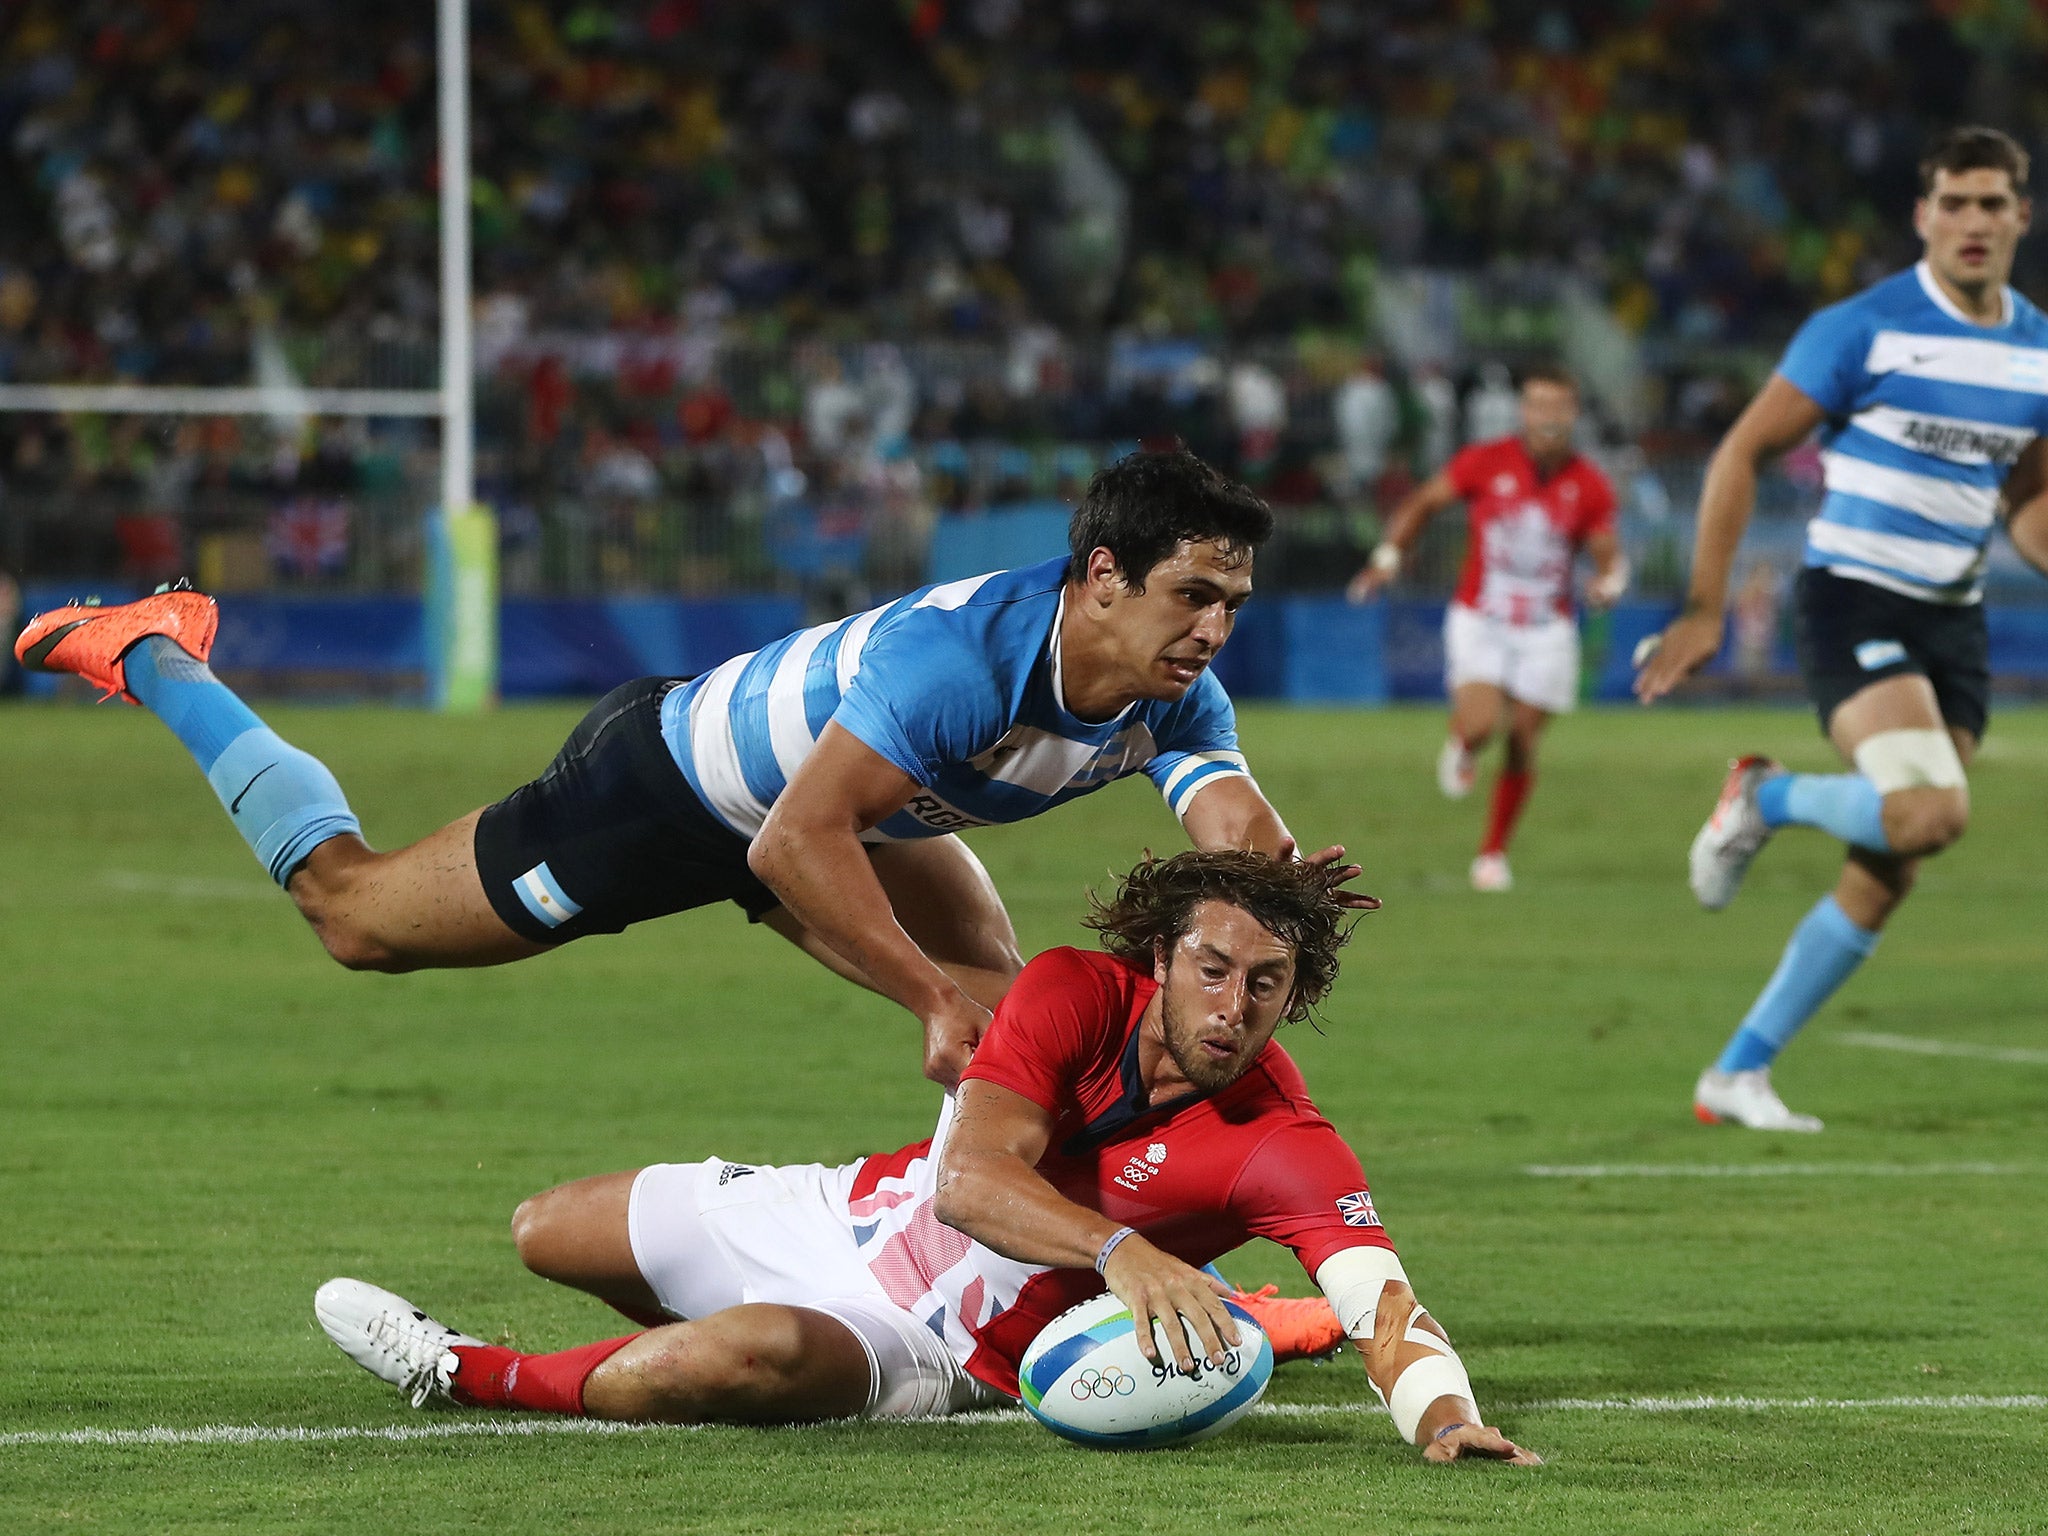 Dan Bibbey scores the match-winning try in Team GB's 5-0 victory over Argentina